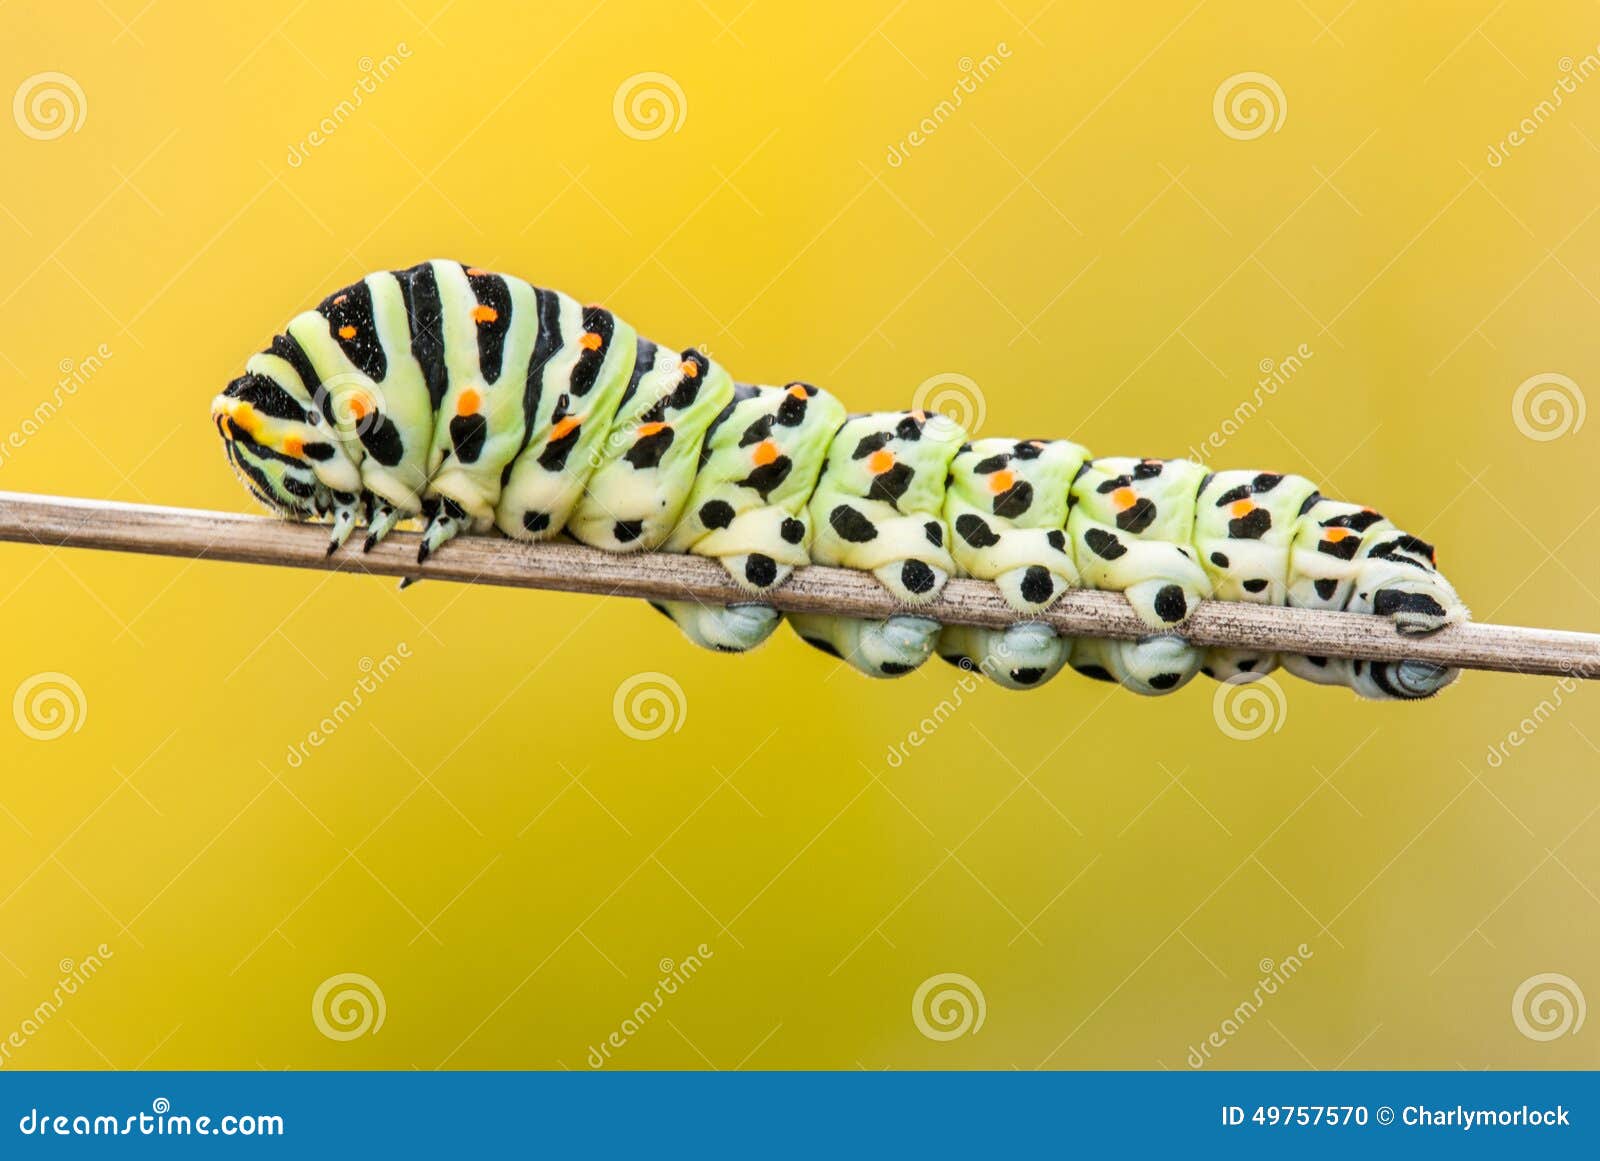 great worm caterpillar on branch macaon